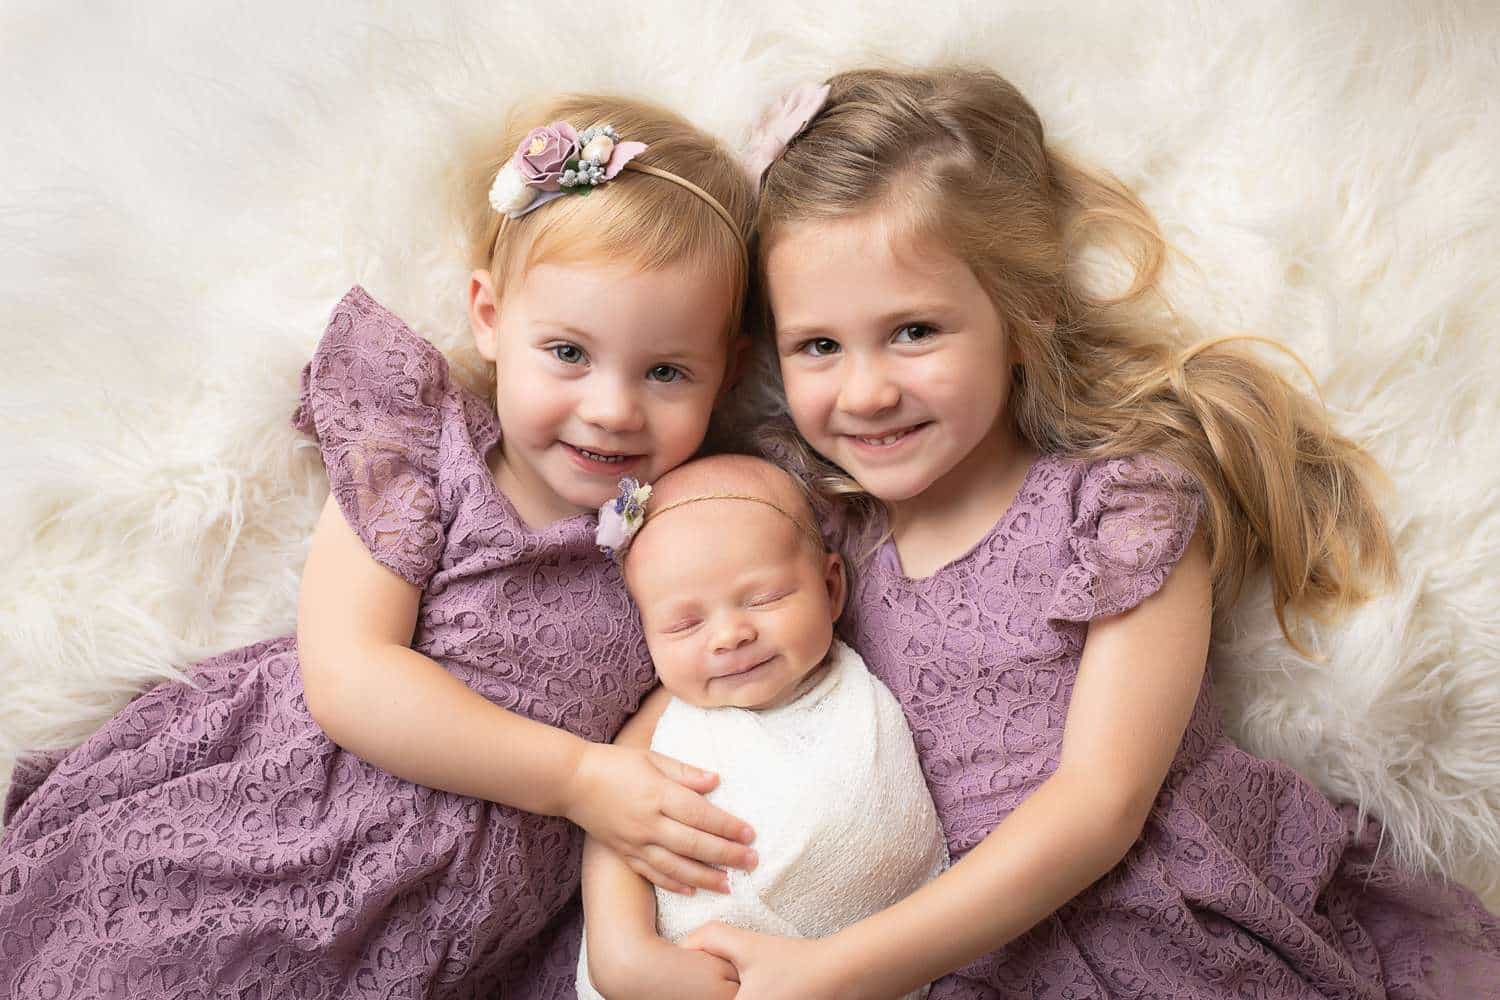 newborn photographer in rochester ny captures newborn baby girl with her sisters